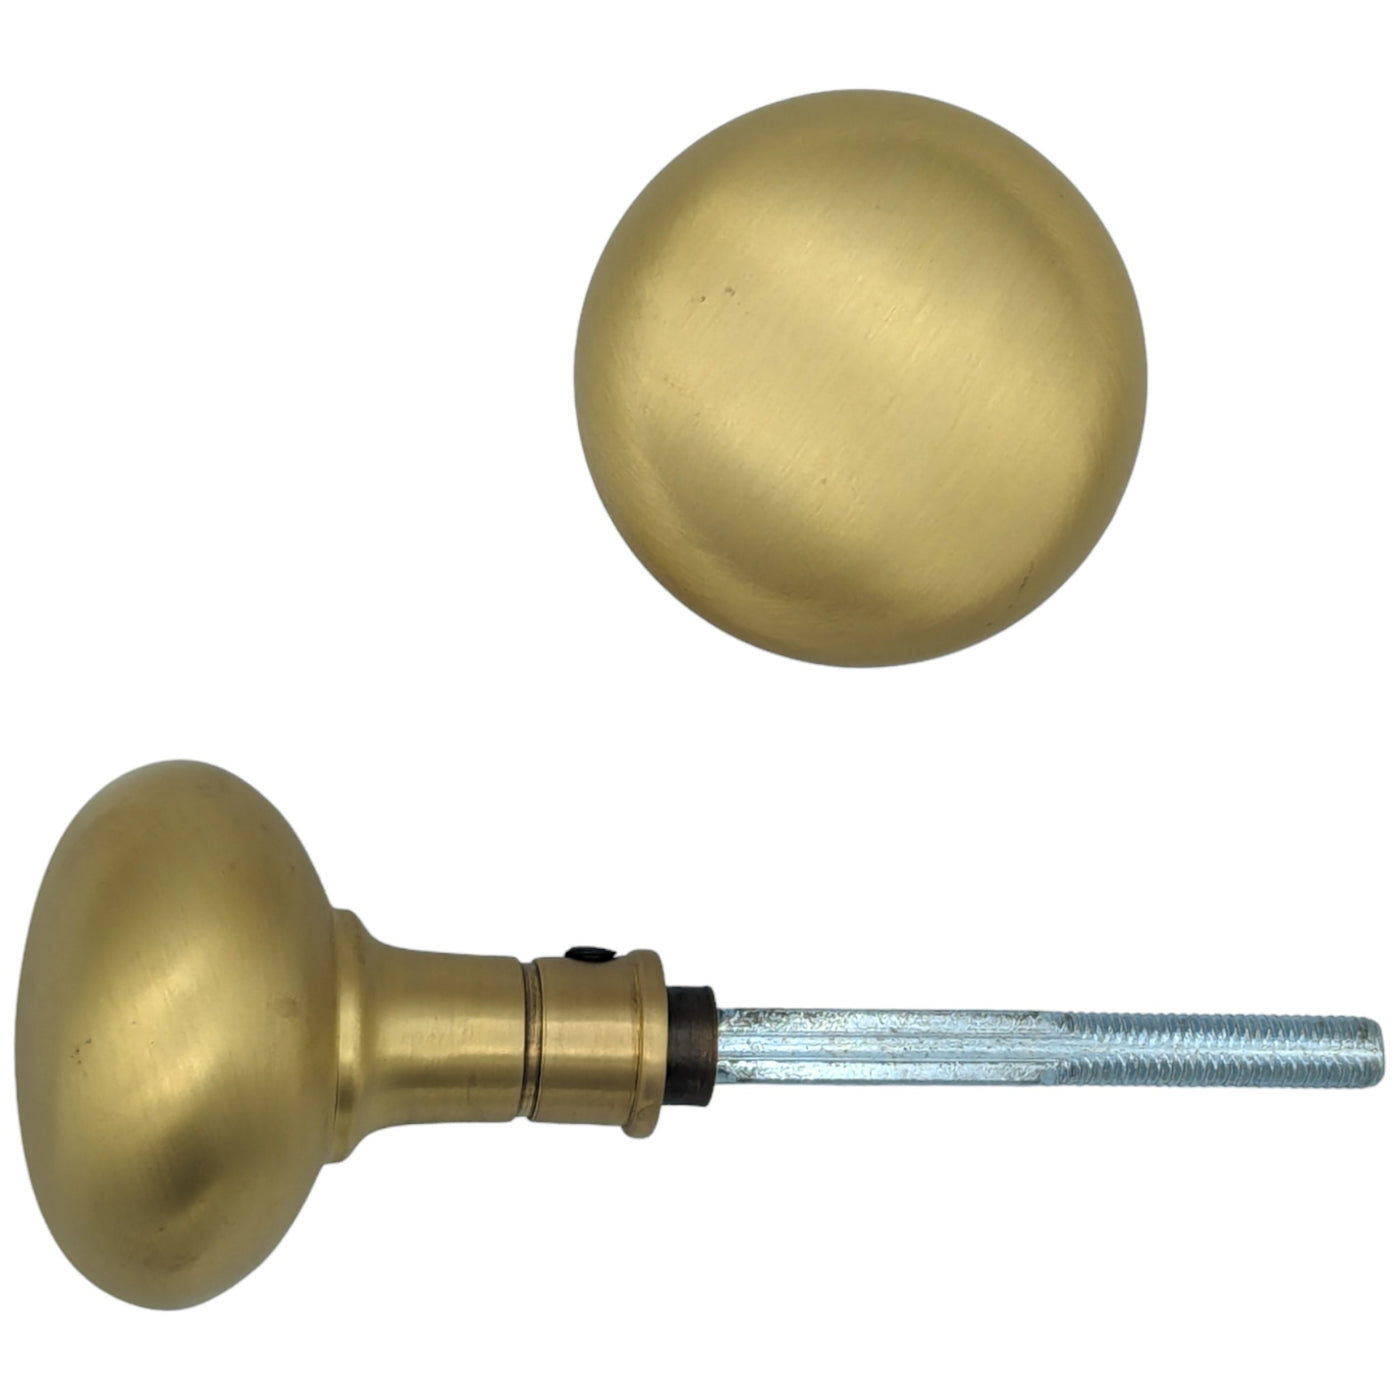 Round Solid Brass Spare Door Knob Set (Several Finishes Available)